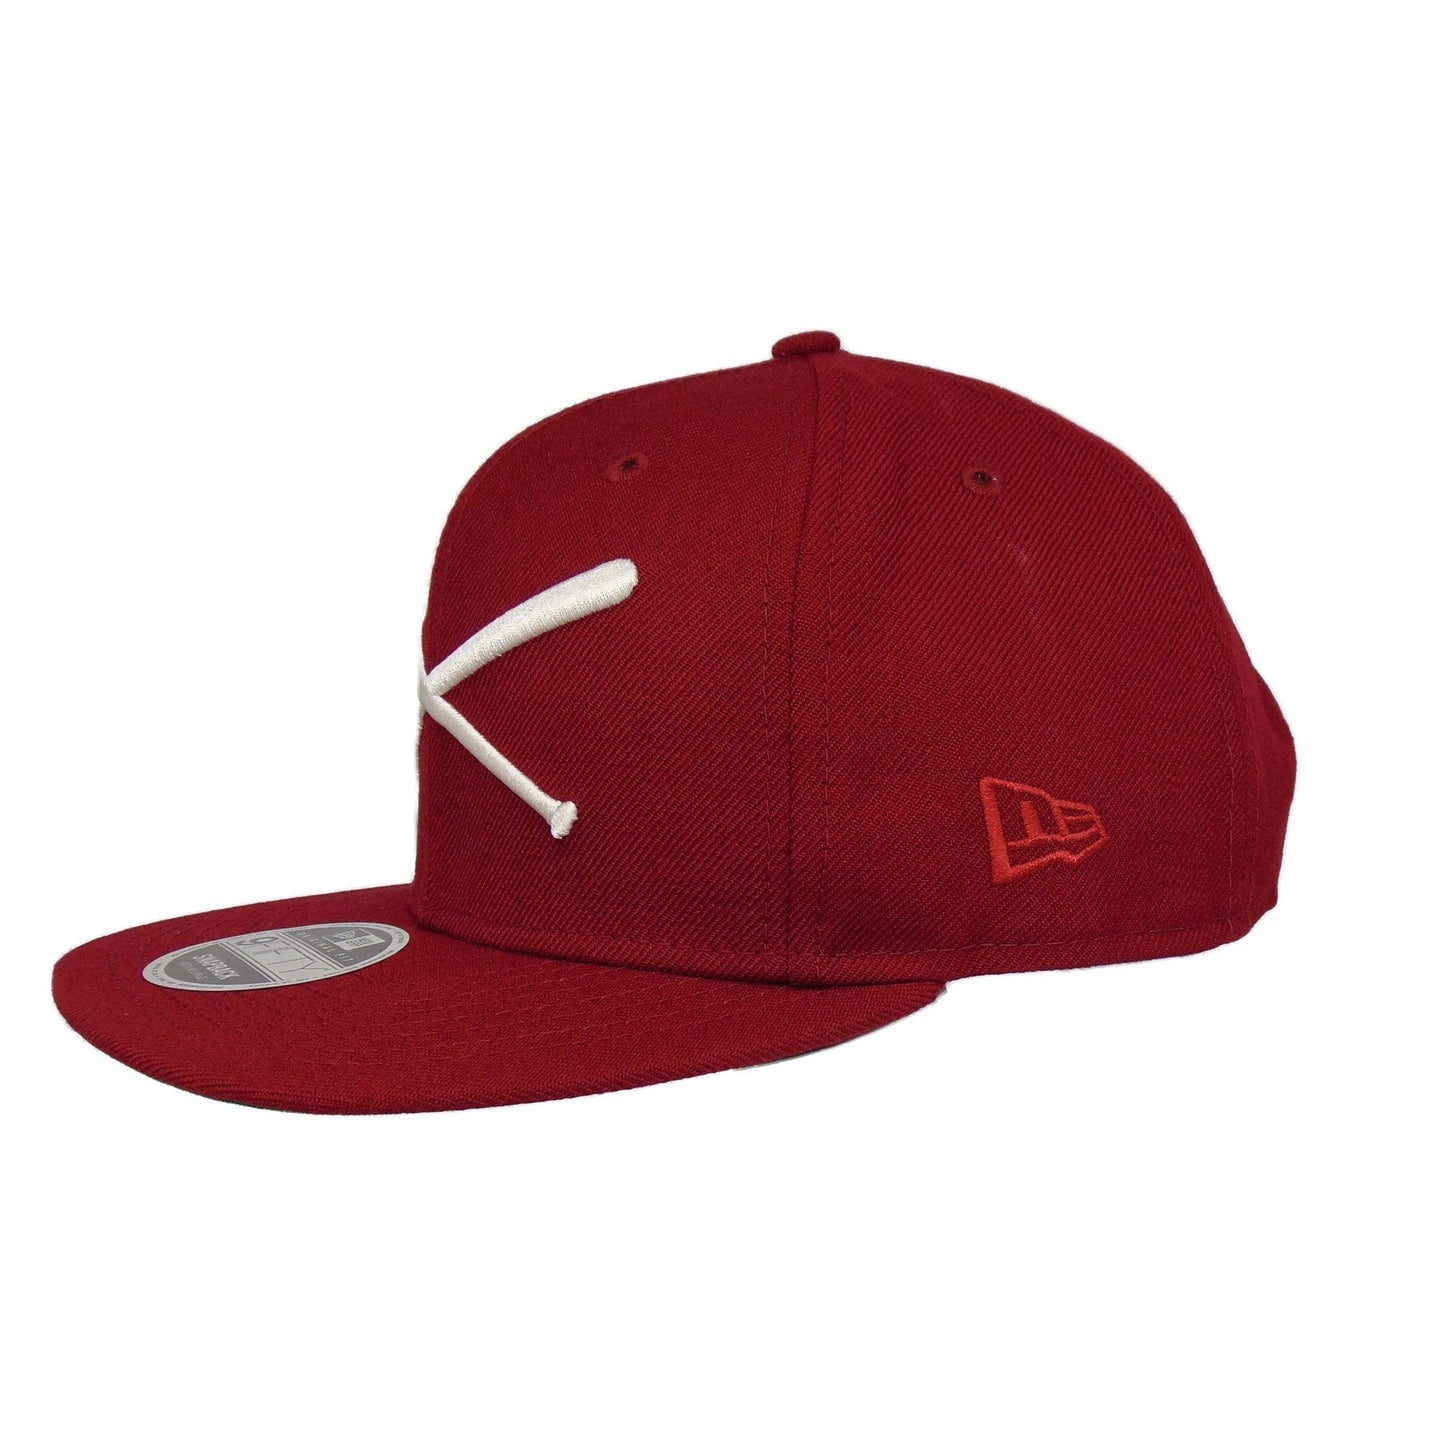 Justfitteds Crossed Bats 9FIFTY New Era Cap Snapback Cardinal Red